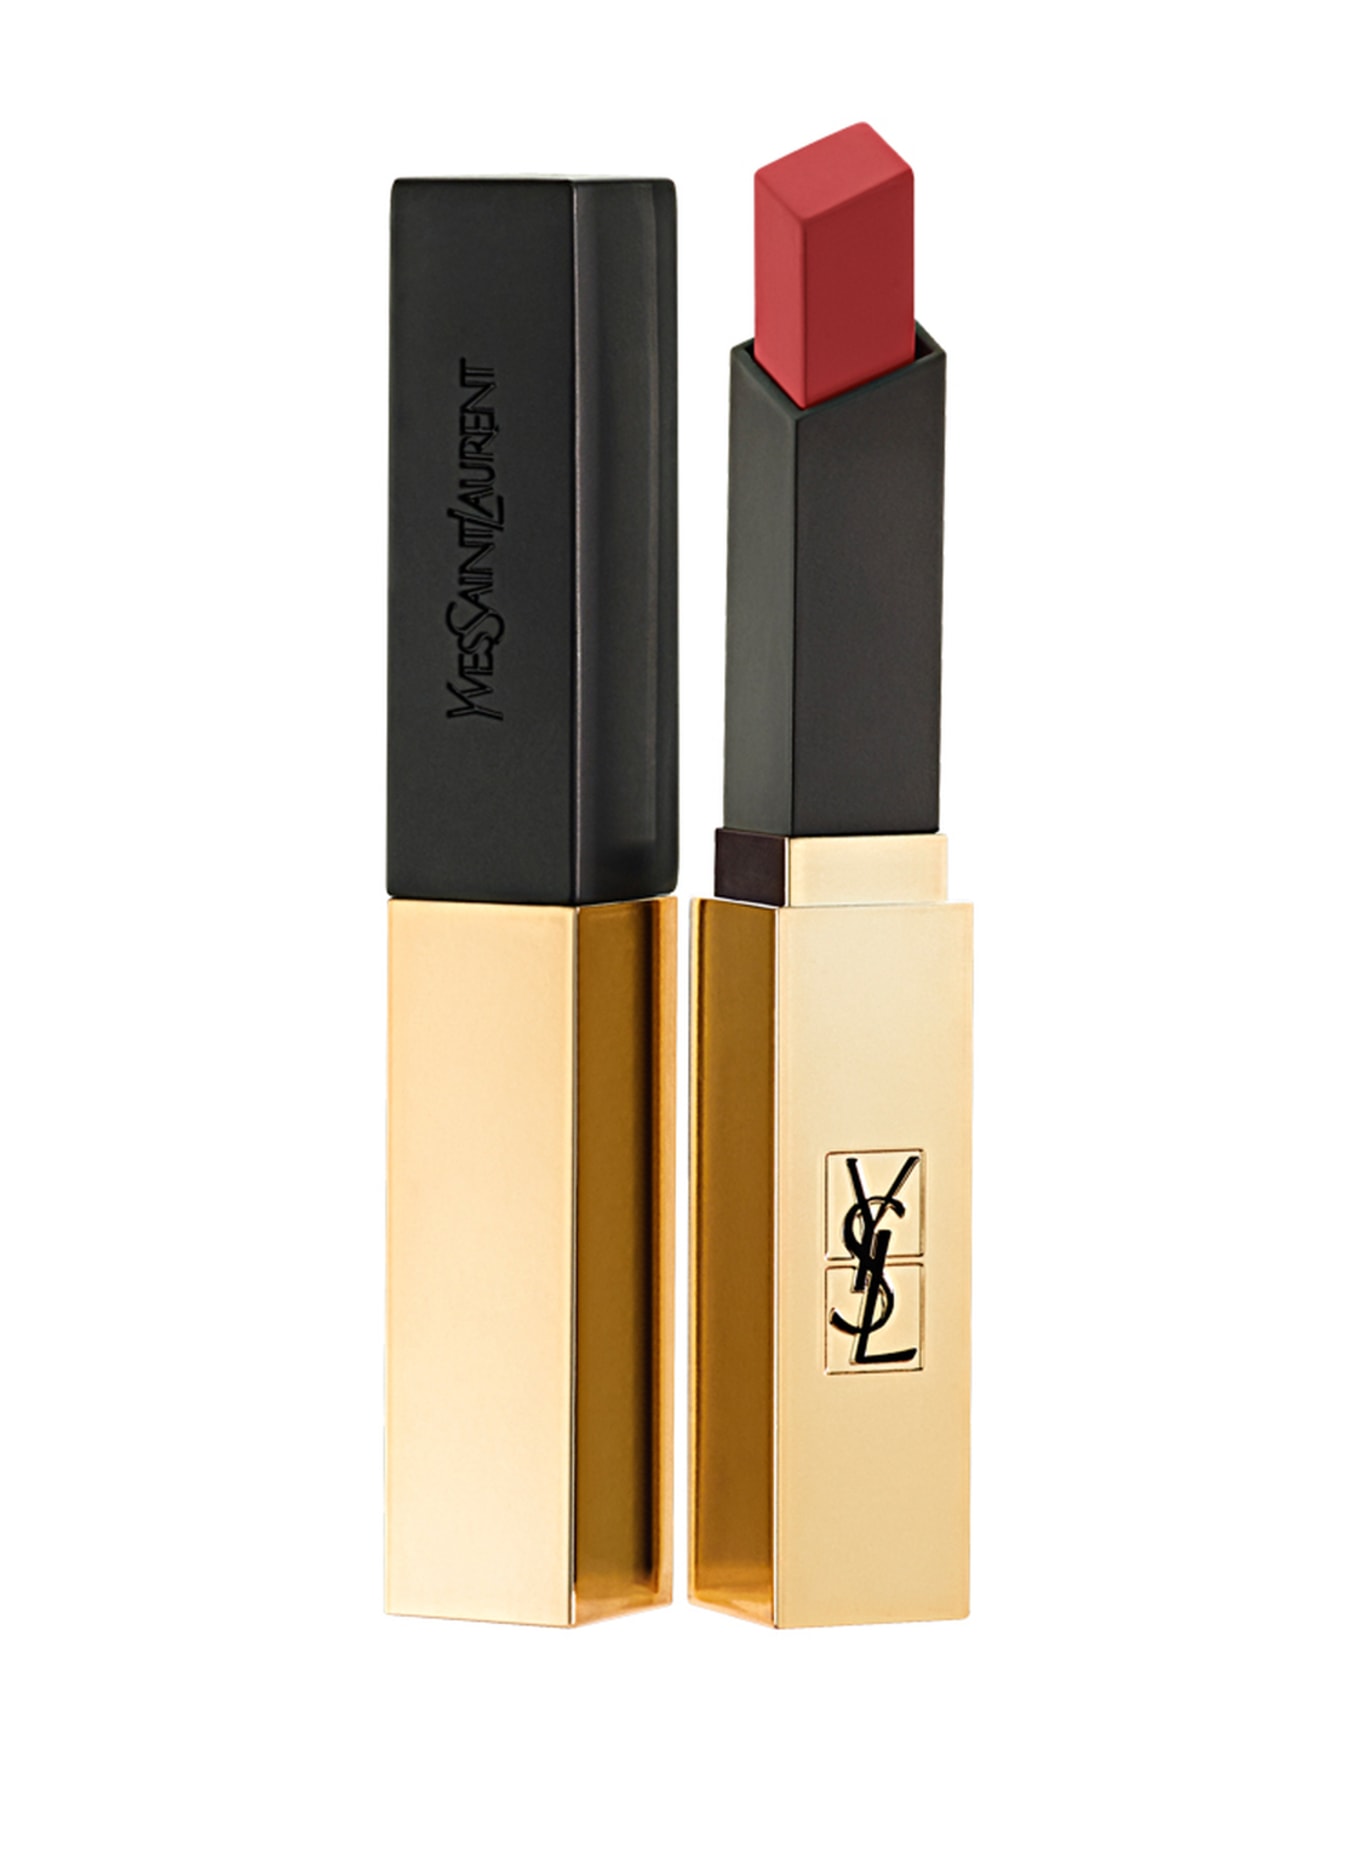 YVES SAINT LAURENT BEAUTÉ ROUGE PUR COUTURE THE SLIM, Farbe: 09 RED ENIGMA (Bild 1)